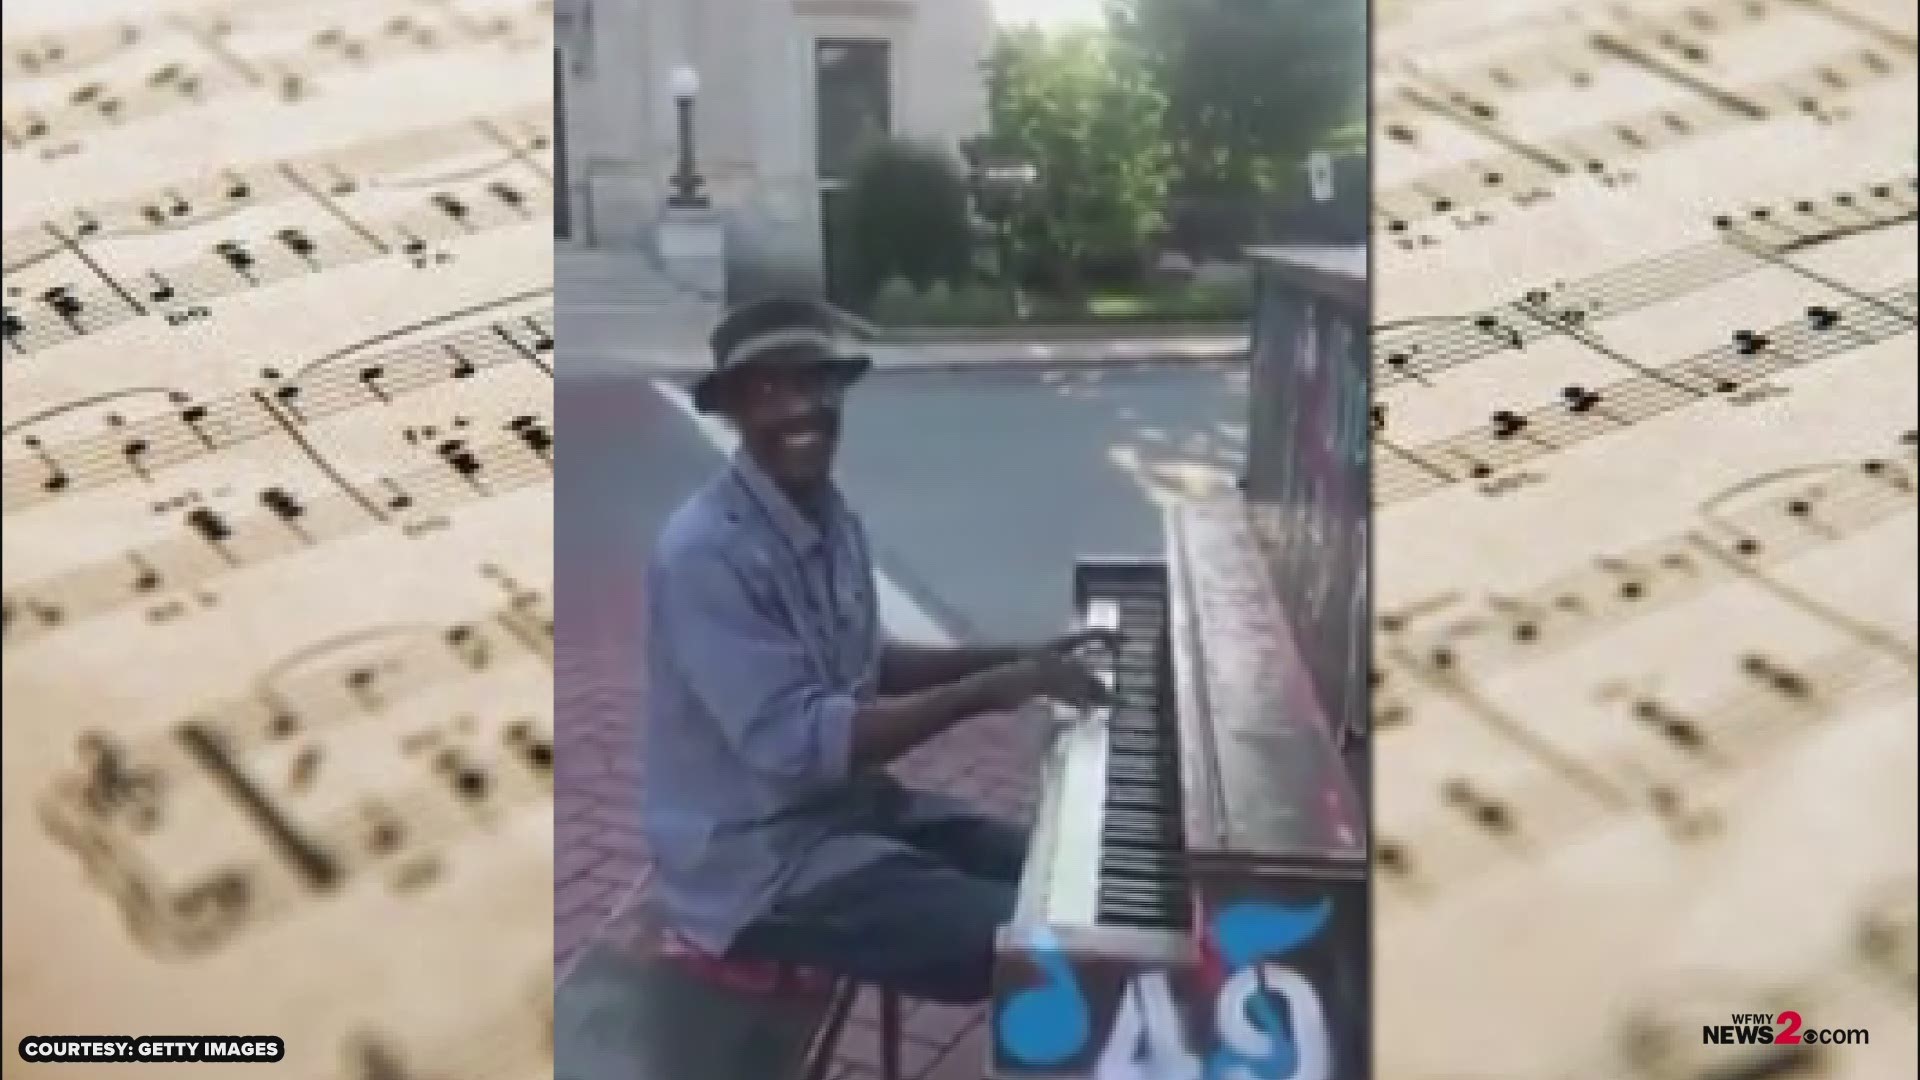 Reginald Stewart Jeffreys known as ‘Mr. Piano Man’ was killed in a hit-and-run. Graham Soda Shop and Grill told WFMY News 2 that 'Reggie' was a great guy, and he will be missed dearly. He played piano for the shop and was a church leader.